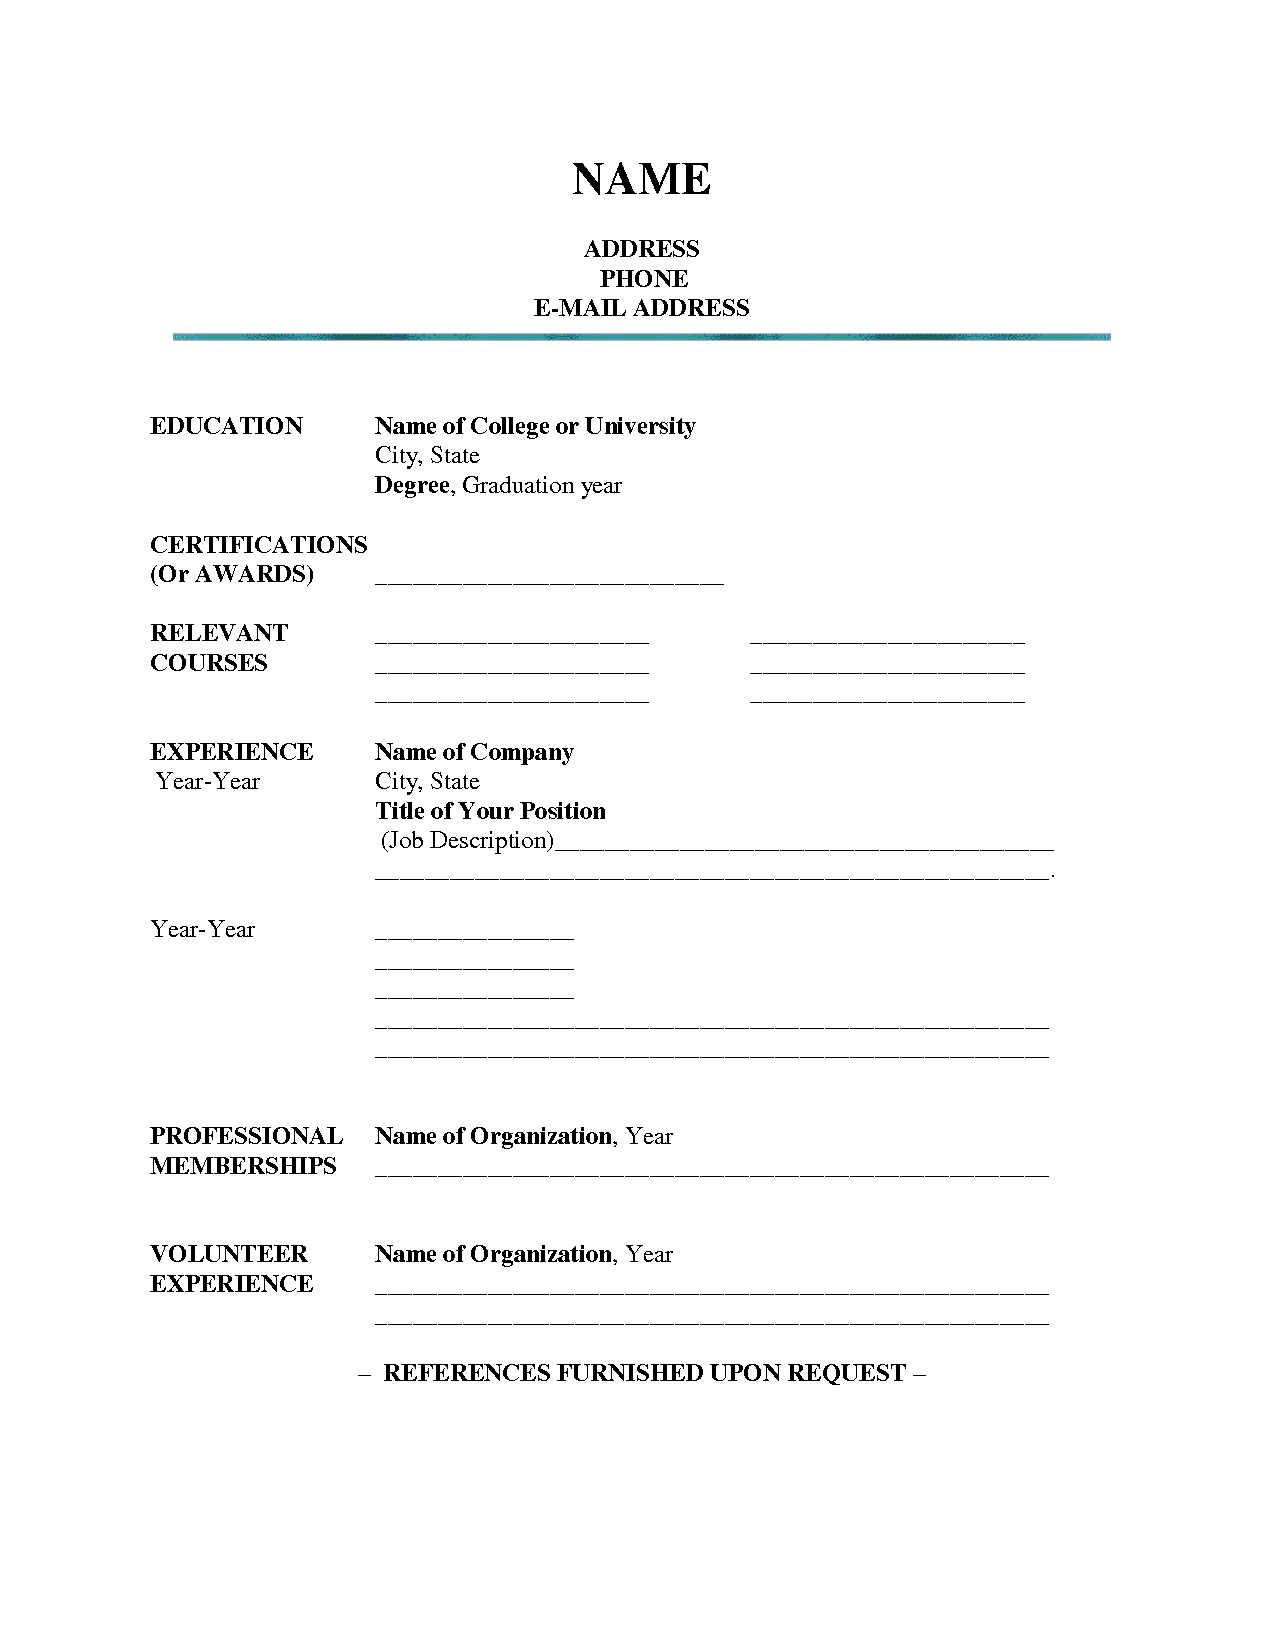 Blank Resume Template Ecommercewordpress Student Resume with proportions 1275 X 1650